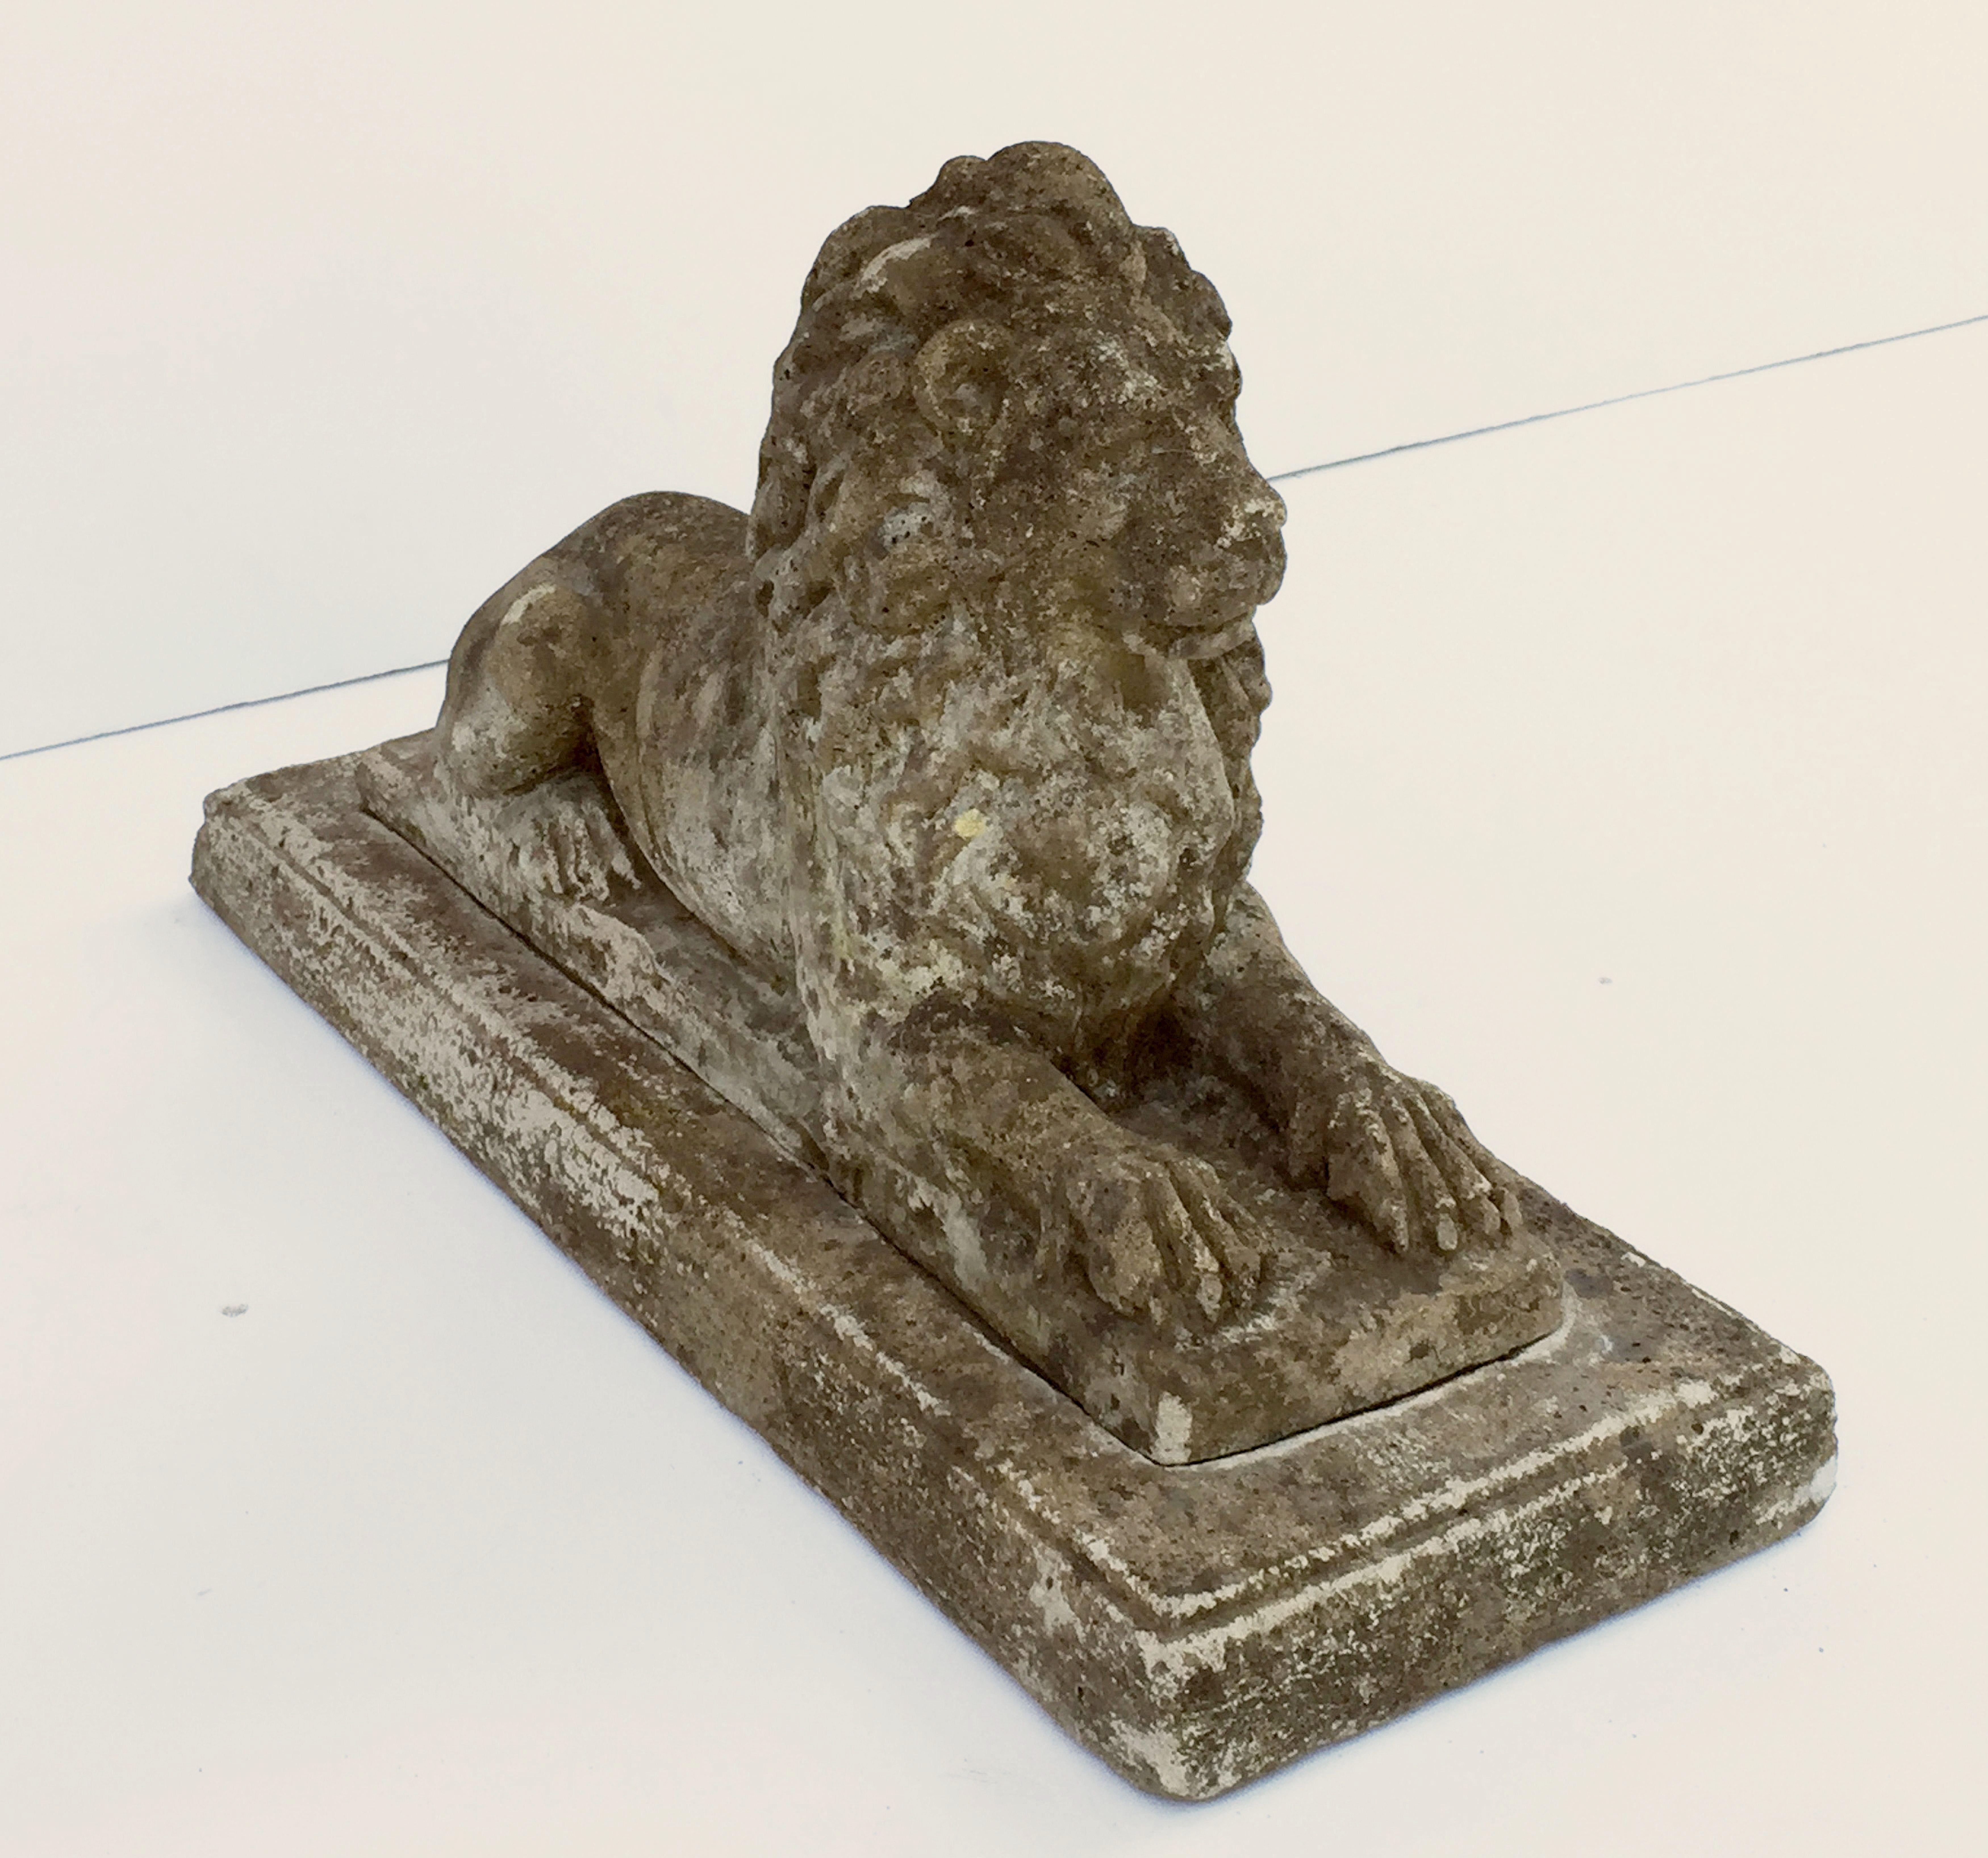 English Garden Stone Lions on Plinths 'Priced as a Pair' 6